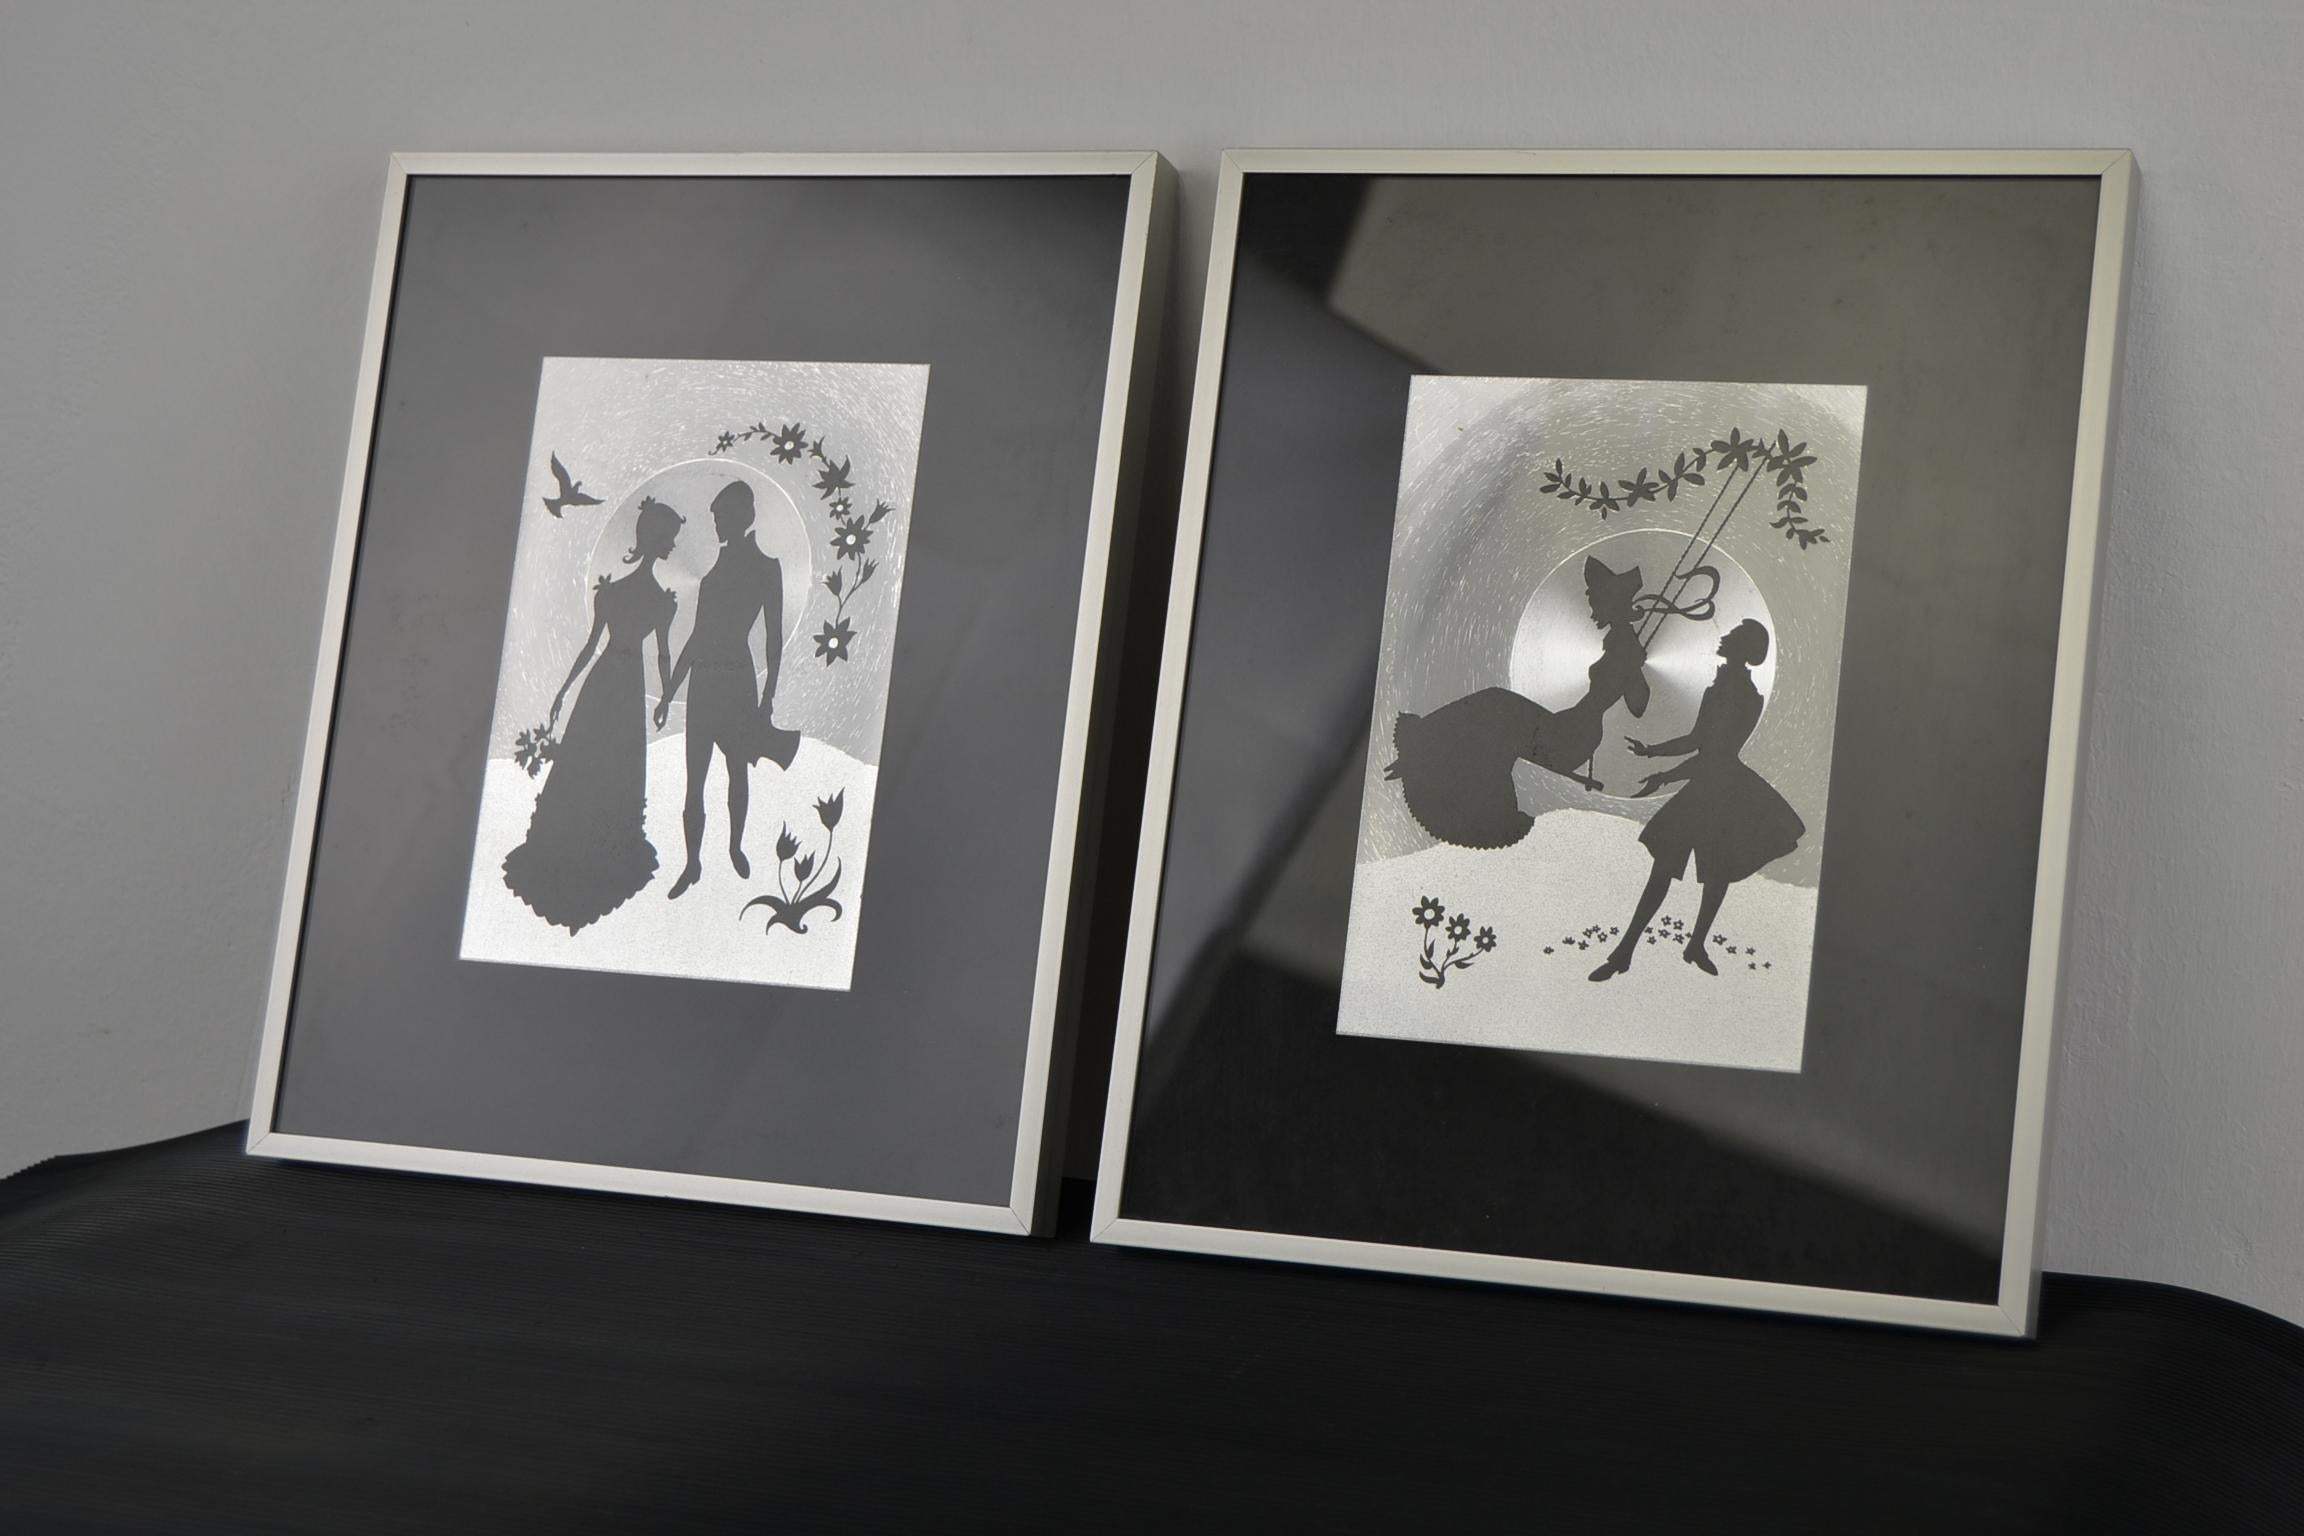 Pair of aluminium framed metallic art prints with Romantic couple.
This two lovely vintage wall decorations have a romantic scene with a man and a women. One work they are walking hand in hand and are flirting,
on the second one he's pushing her